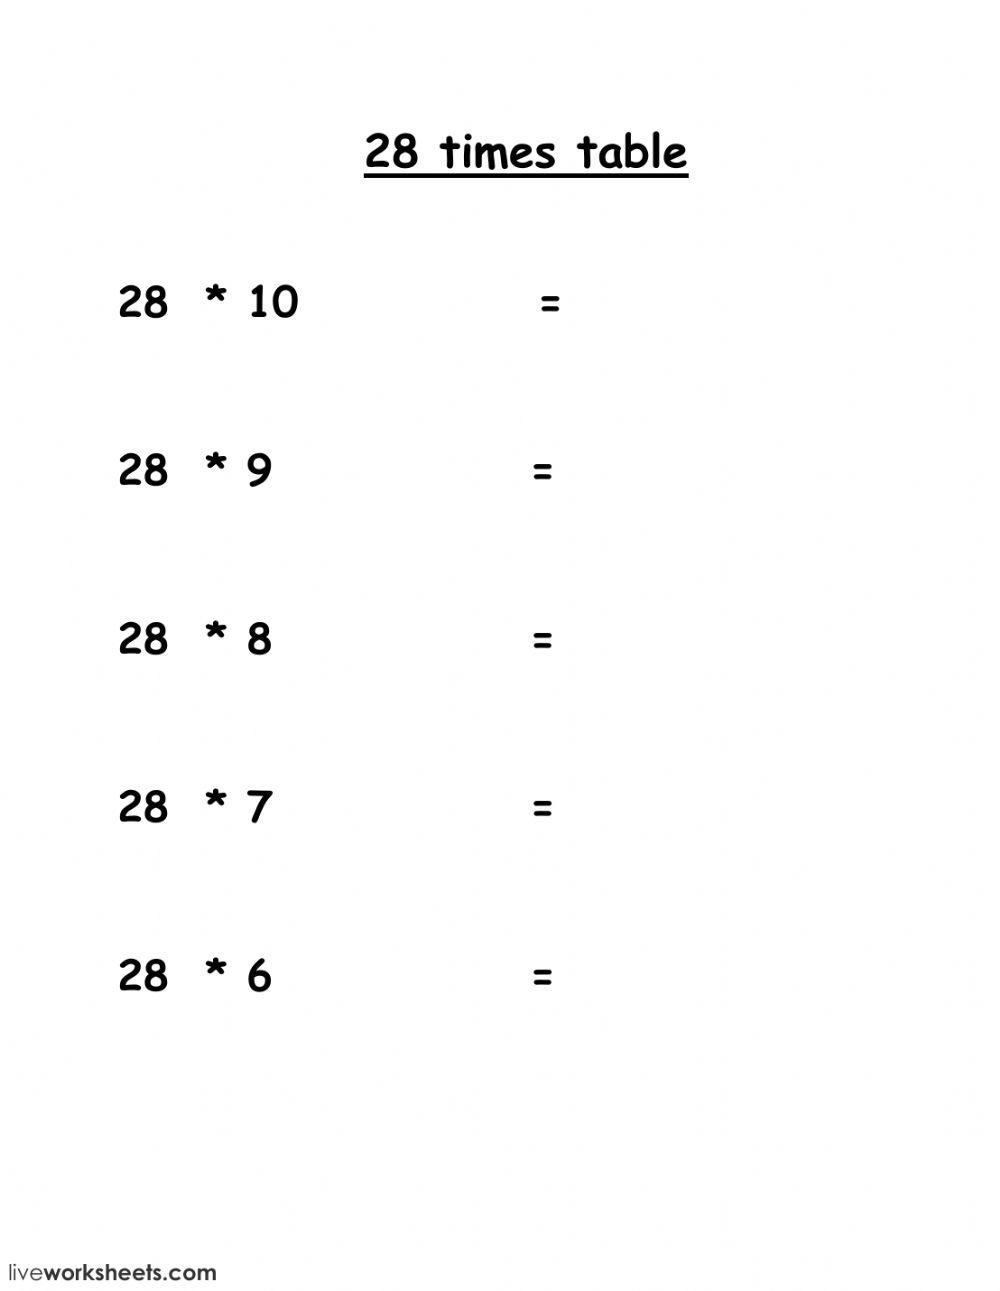 28 times table